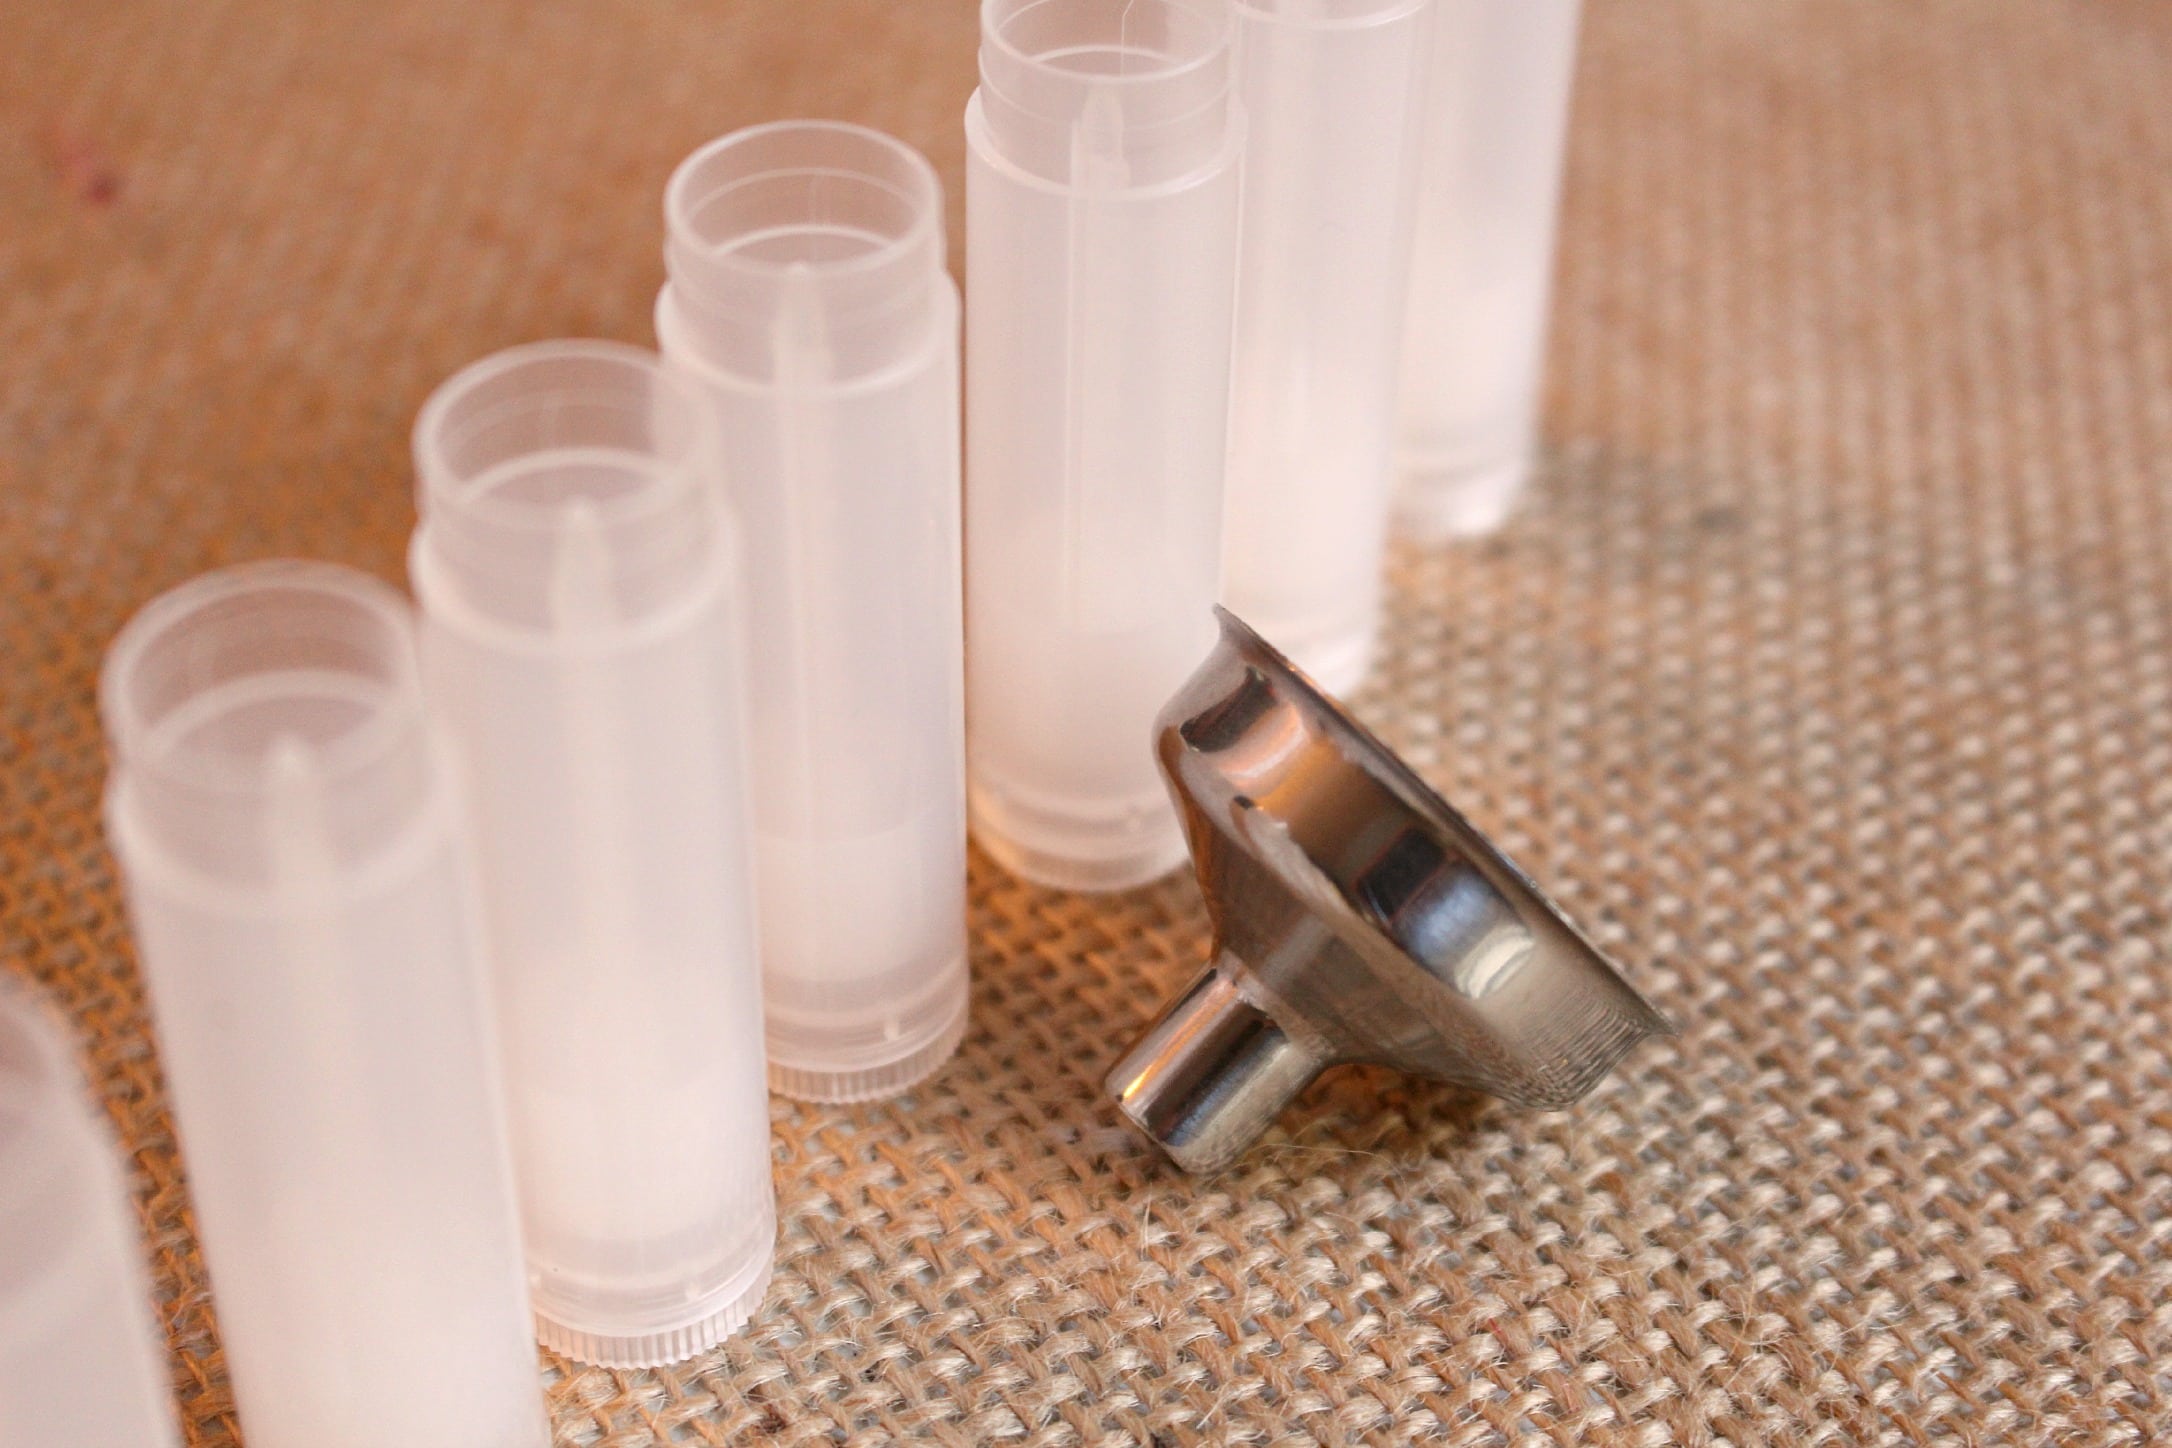 How to Make Lip Balm: Empty tubes and a small metal funnel for making lip balm at home